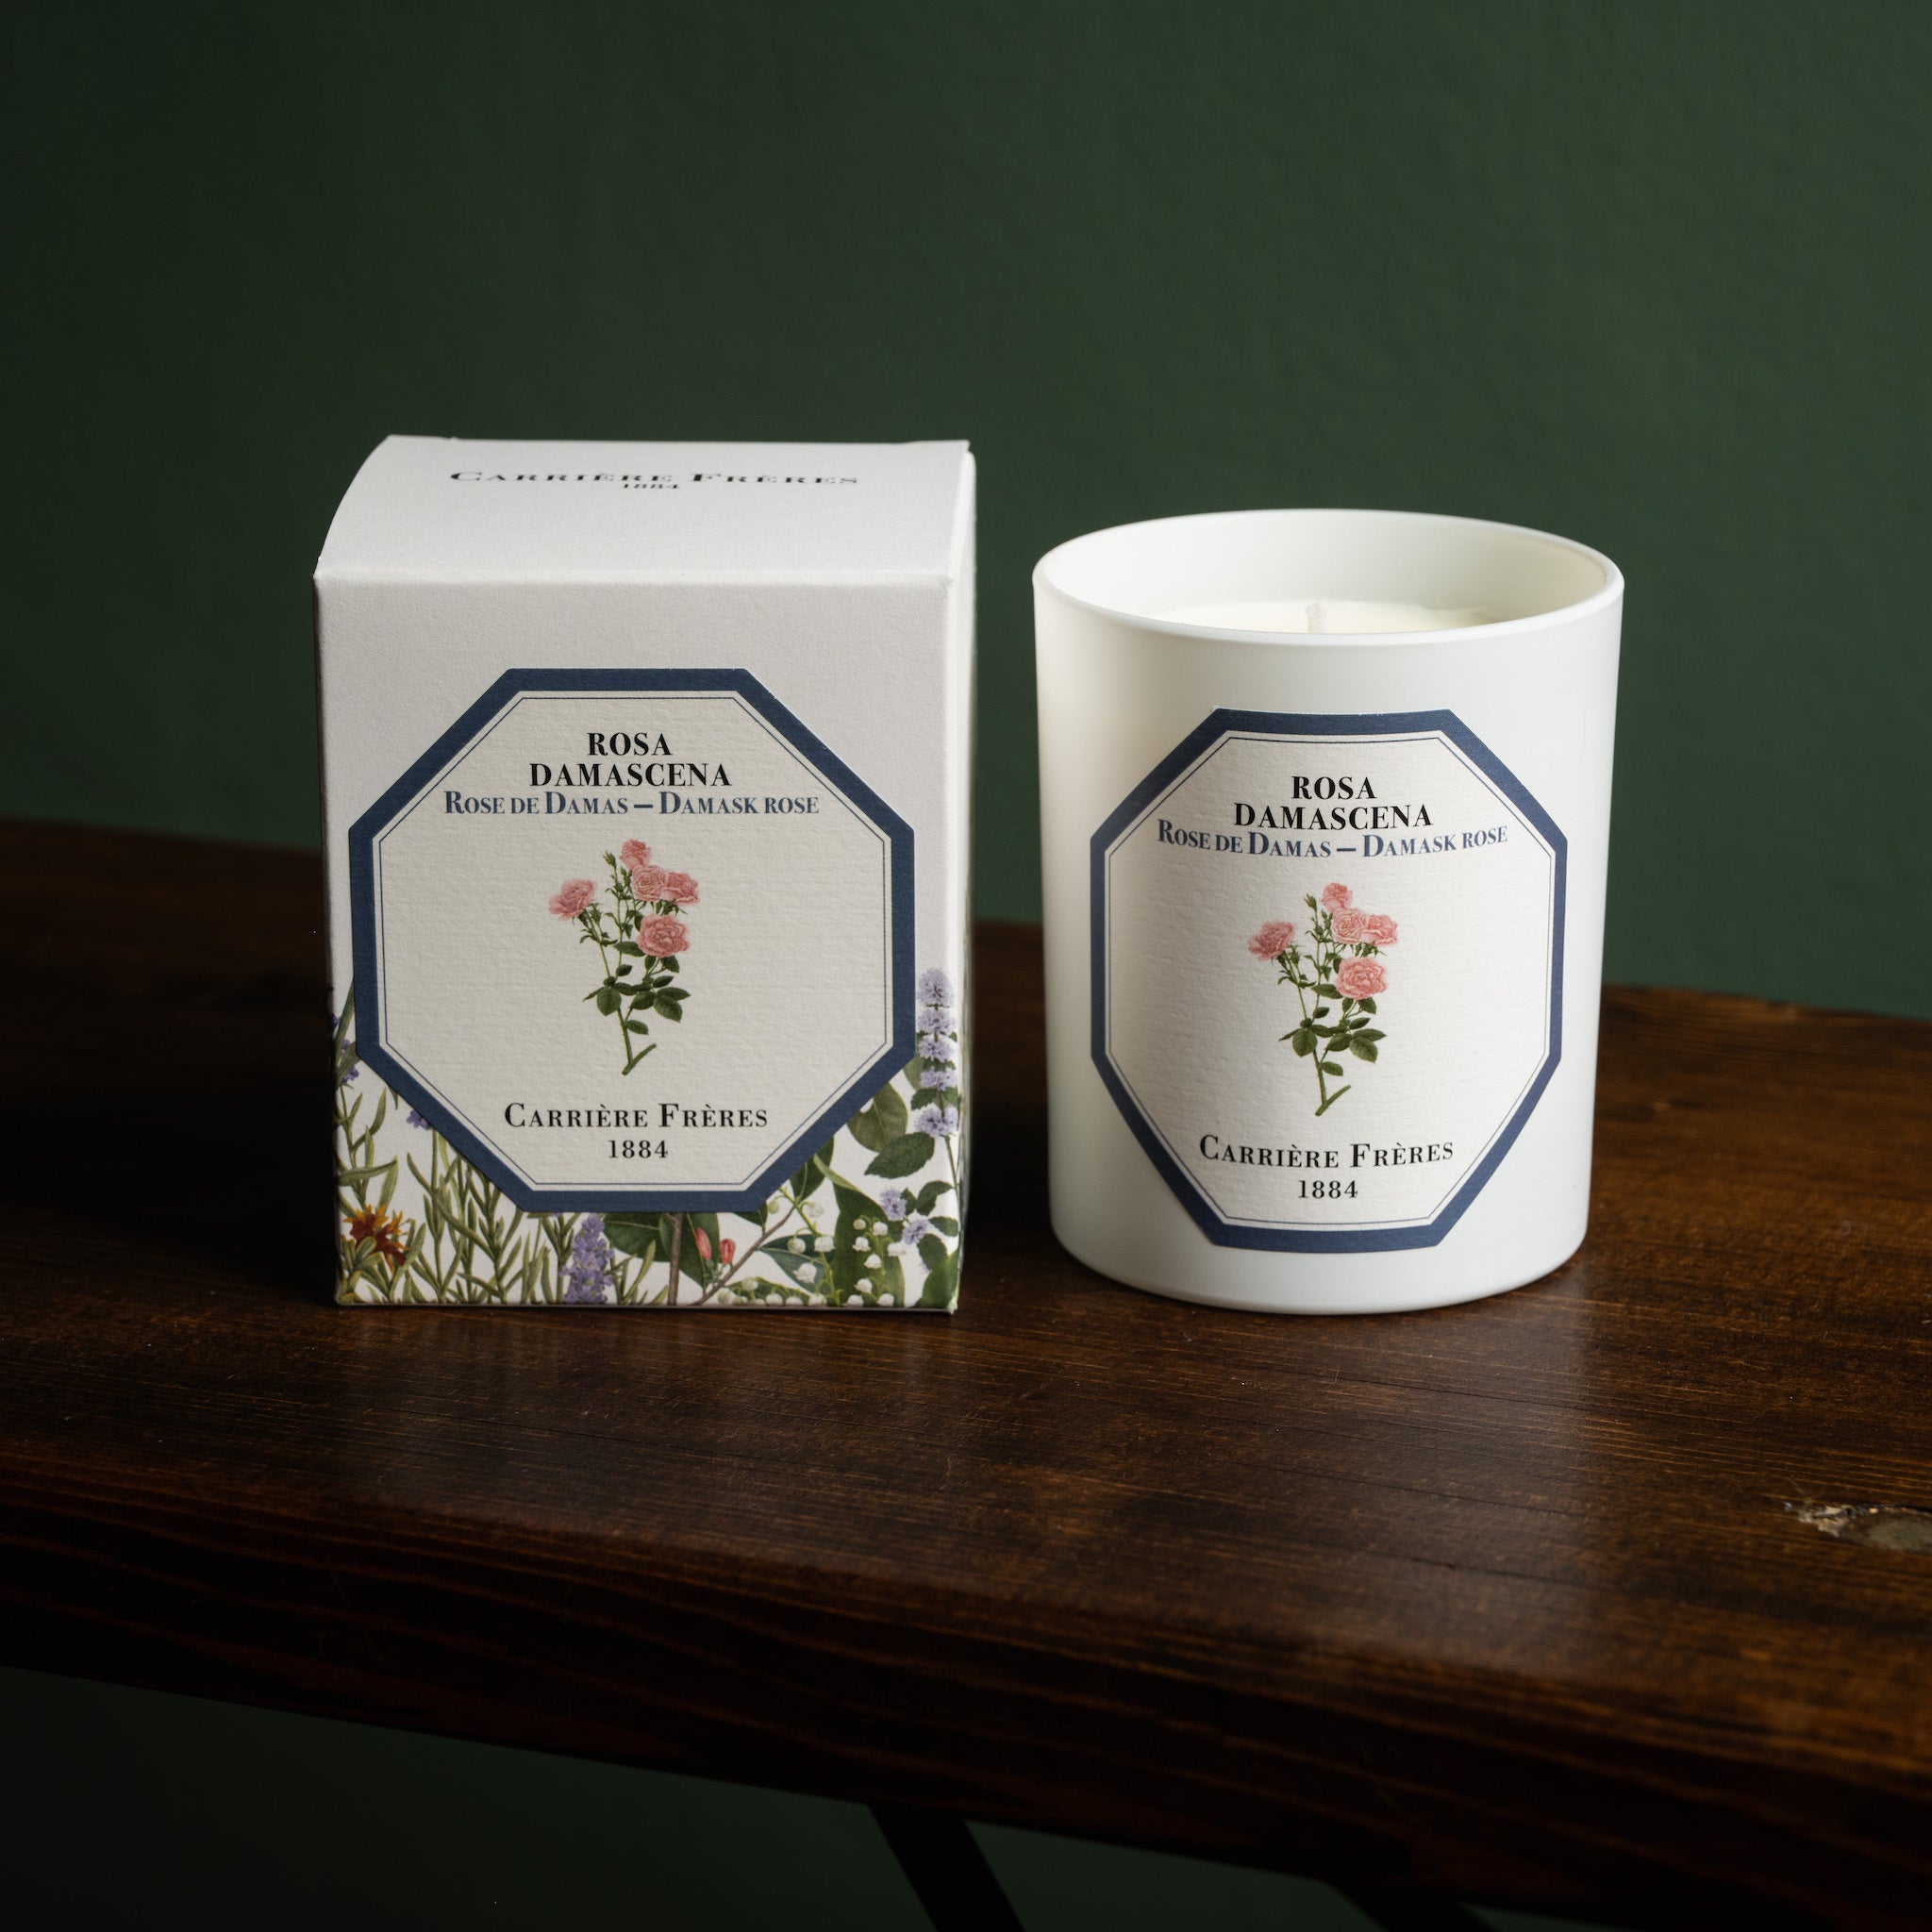 Carriere Freres Damask Rose scented candle & box